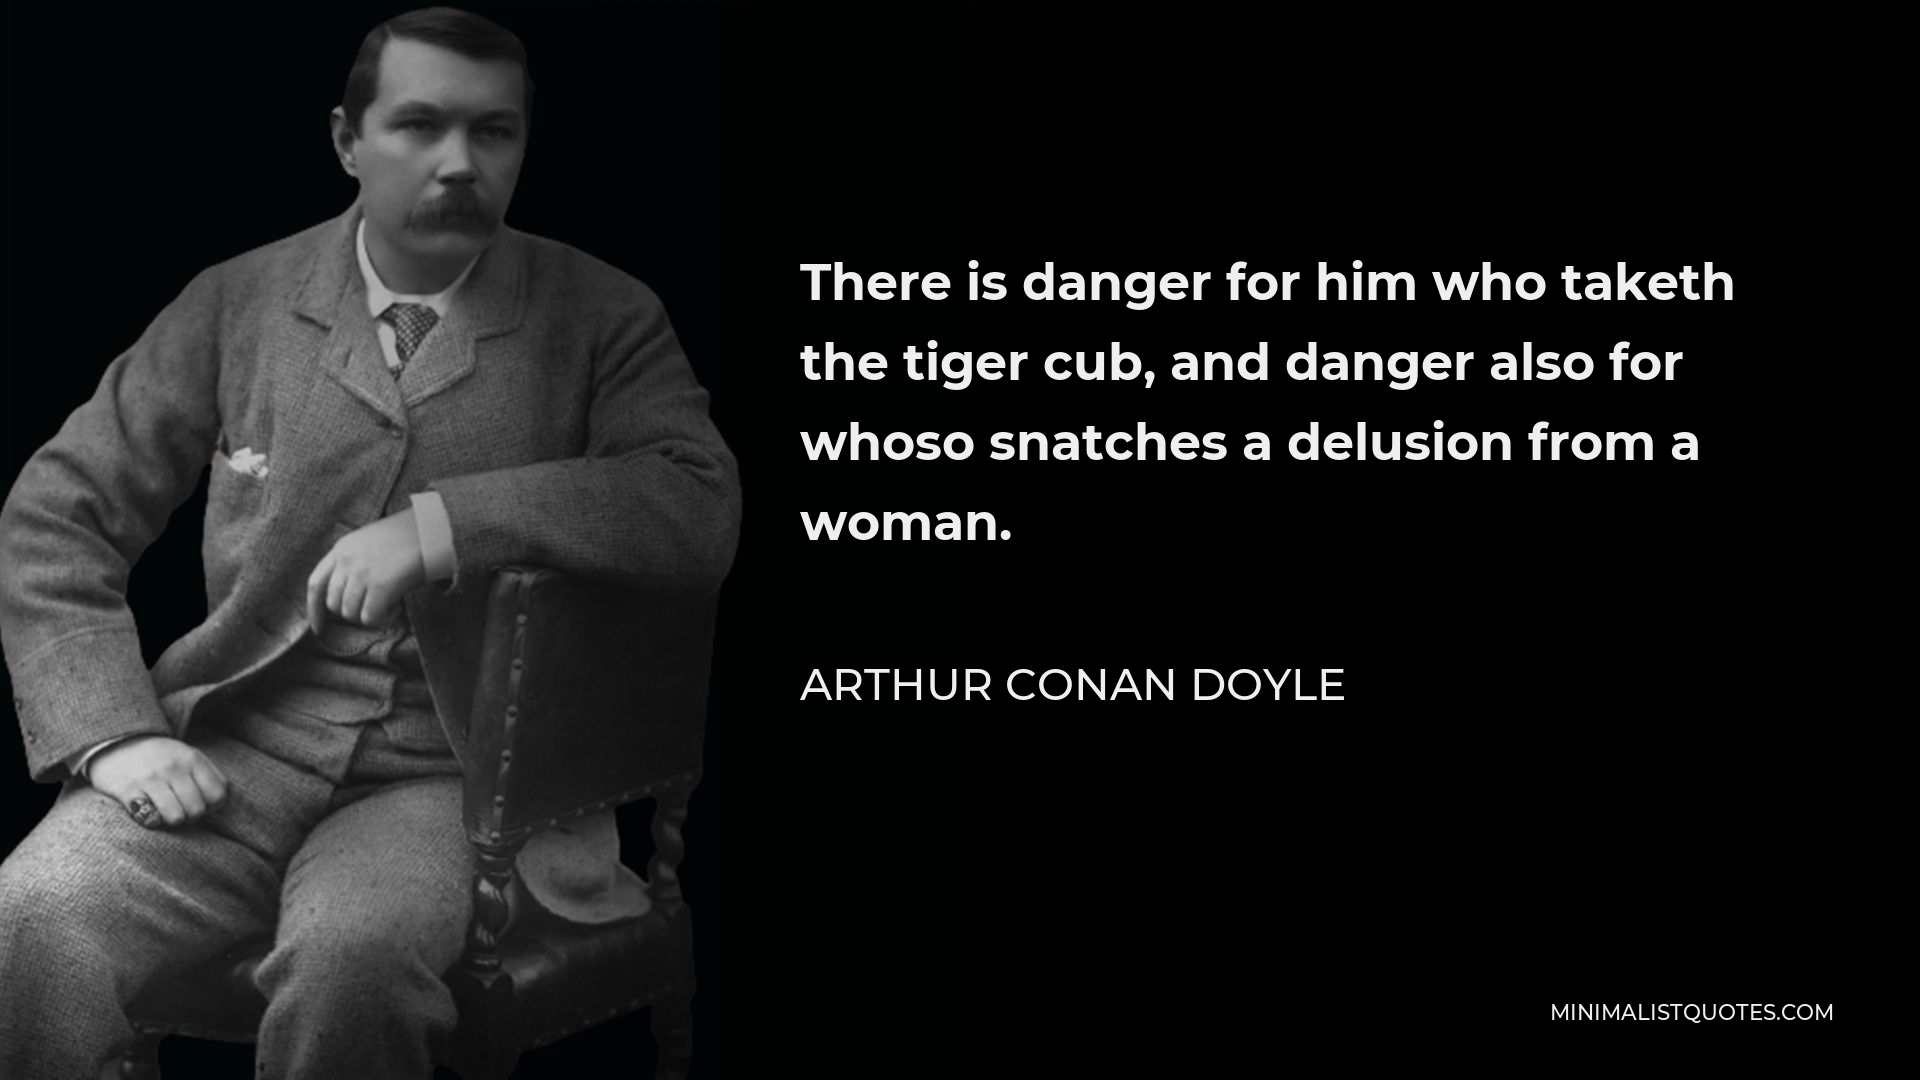 Arthur Conan Doyle Quote - There is danger for him who taketh the tiger cub, and danger also for whoso snatches a delusion from a woman.